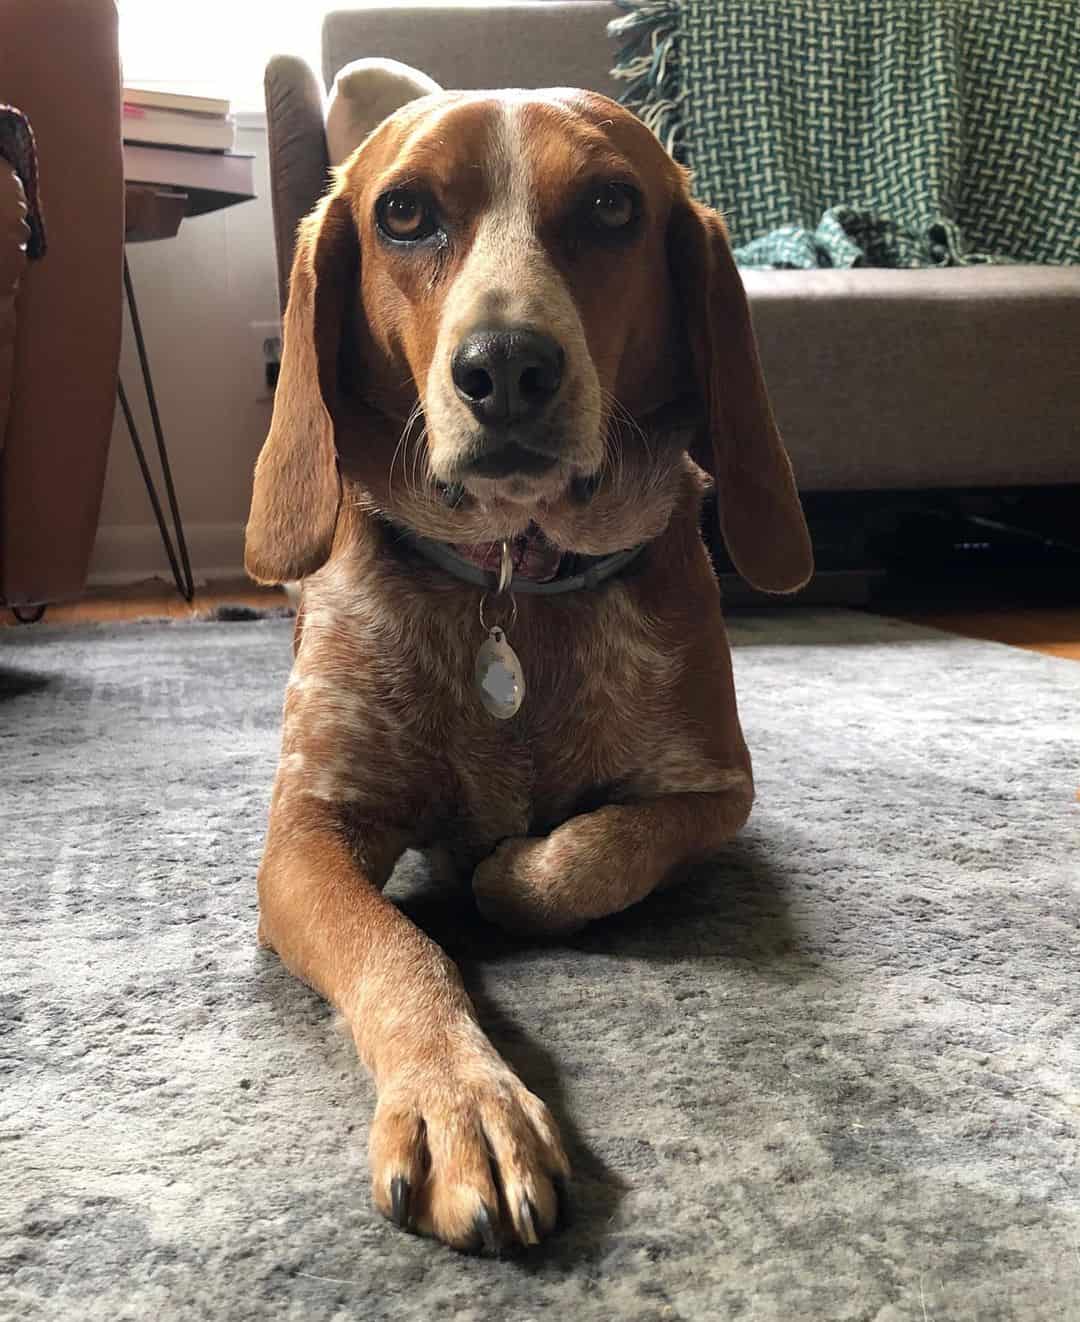 Redtick Beagle is lying on the floor and looking at the camera